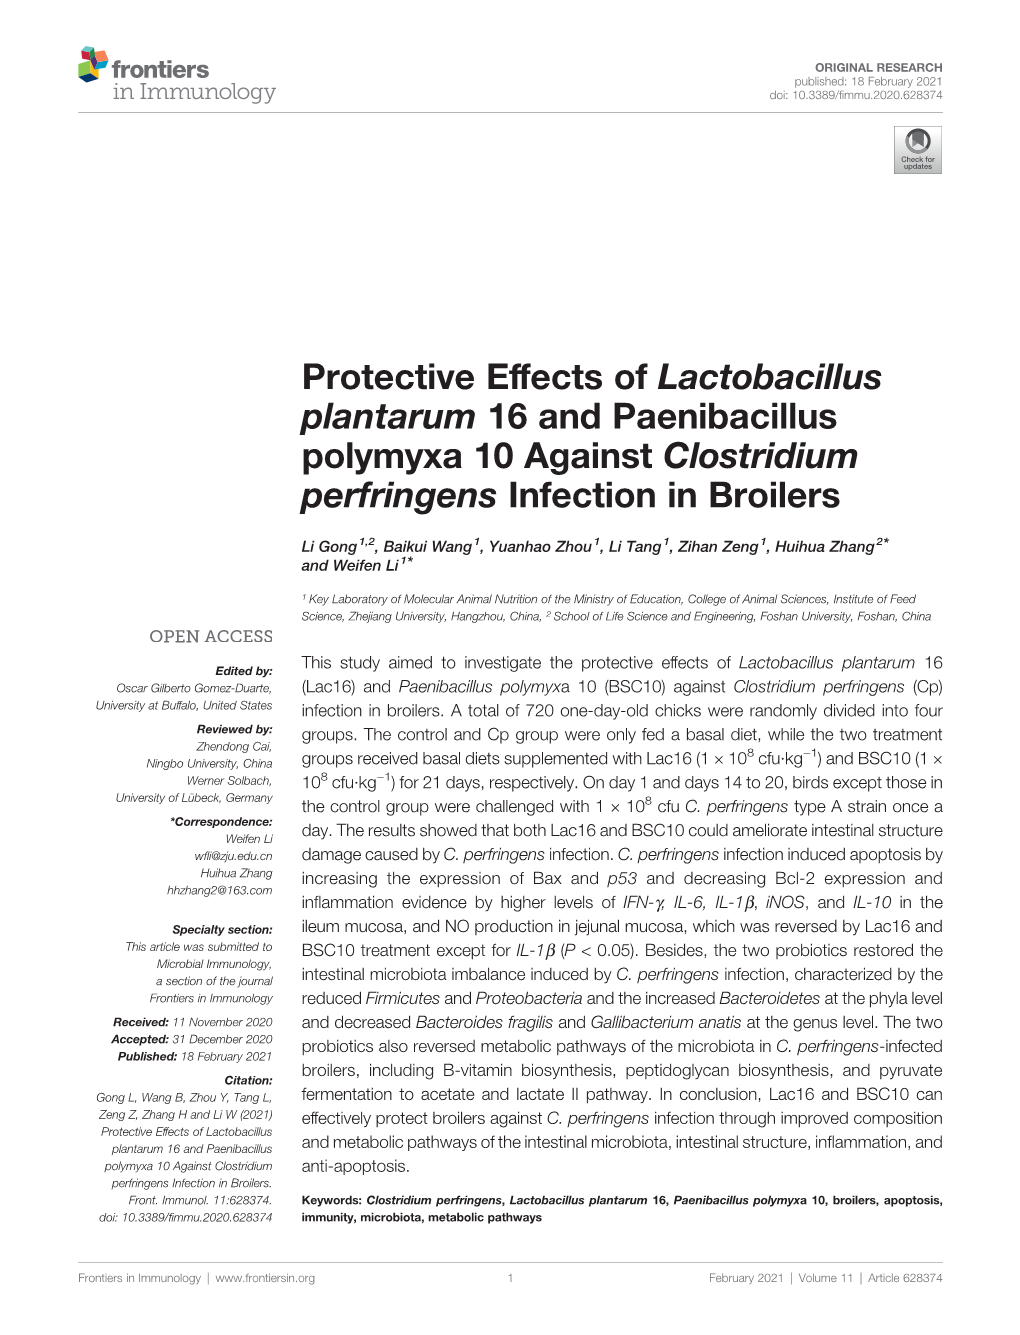 Protective Effects of Lactobacillus Plantarum 16 and Paenibacillus Polymyxa 10 Against Clostridium Perfringens Infection in Broilers